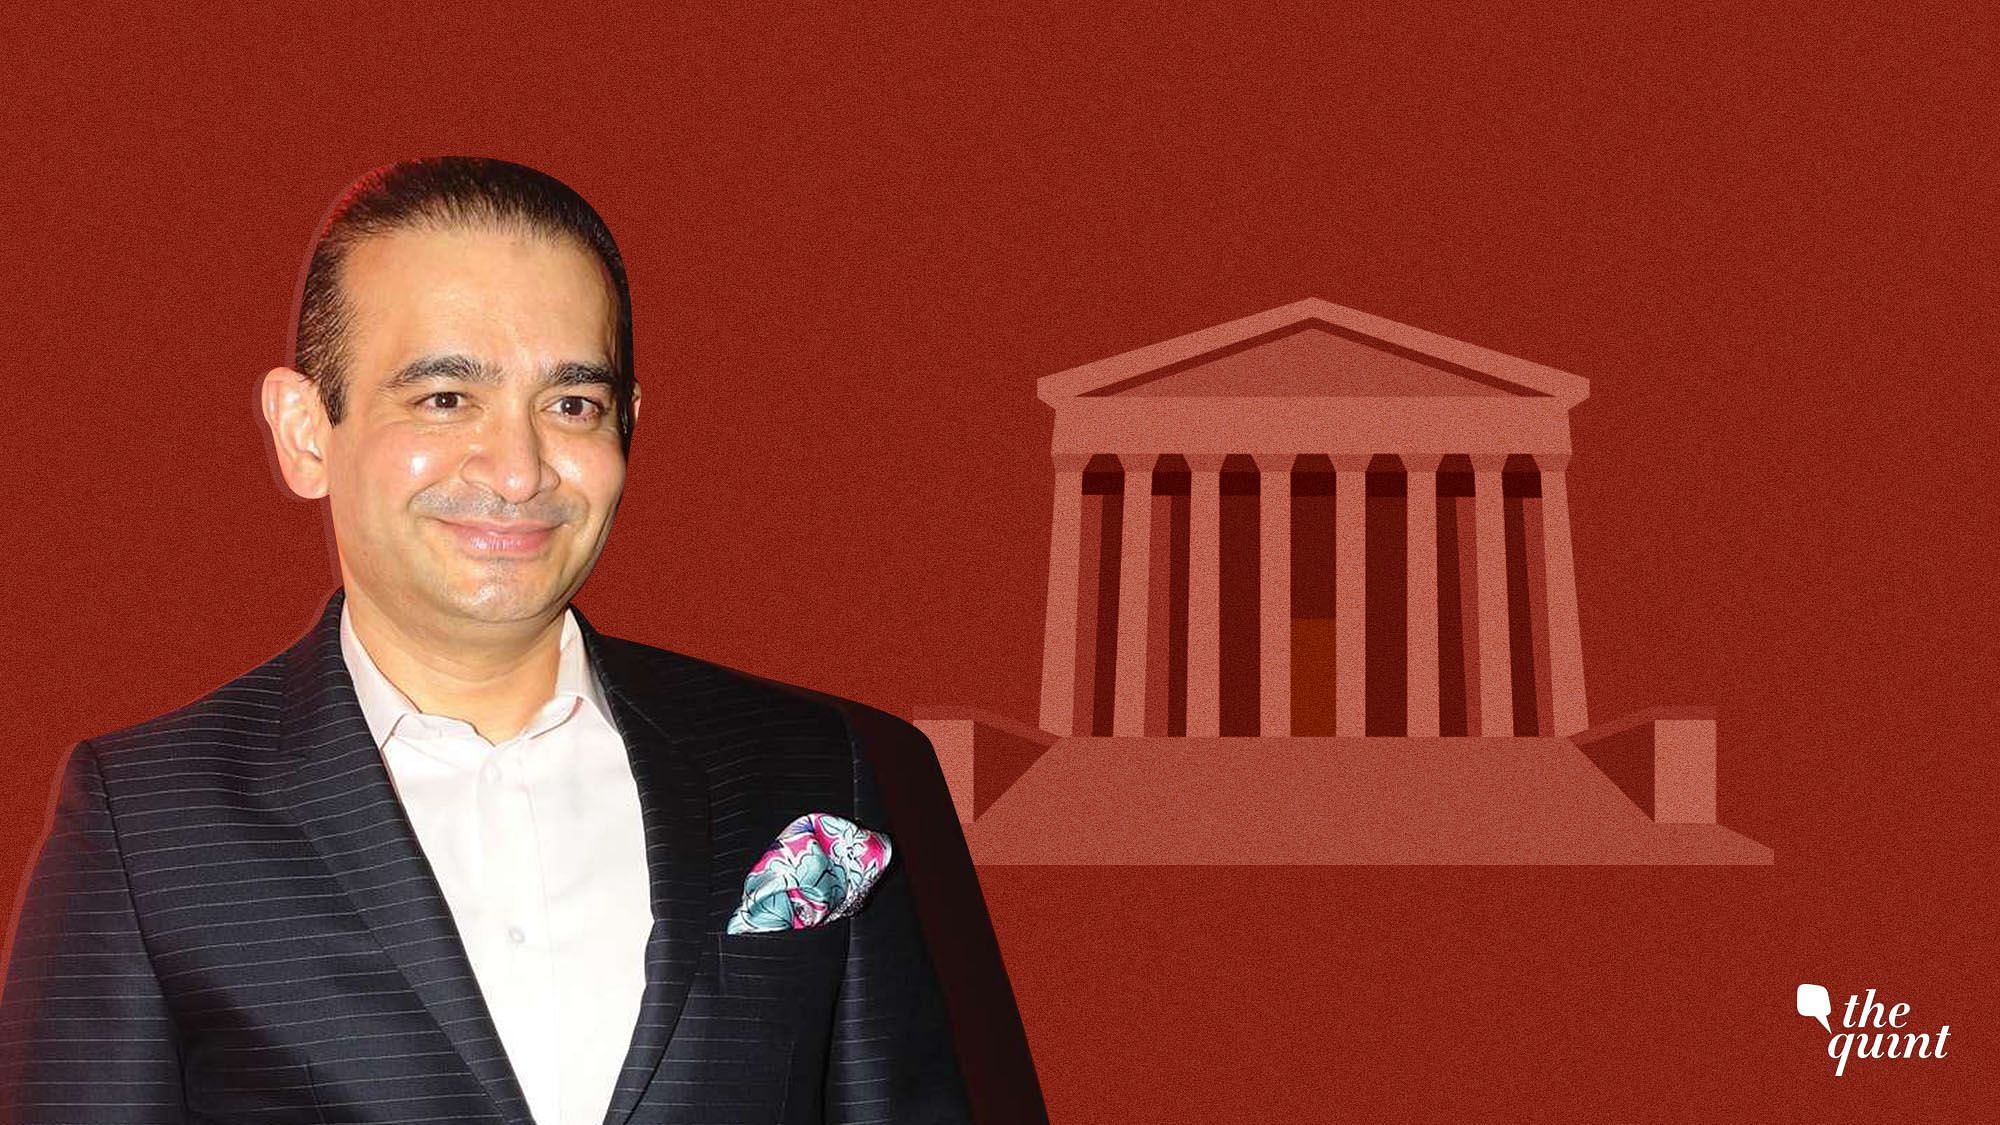 Nirav Modi is accused of defrauding the Punjab National Bank (PNB) with over Rs 13,700 crore. &nbsp;